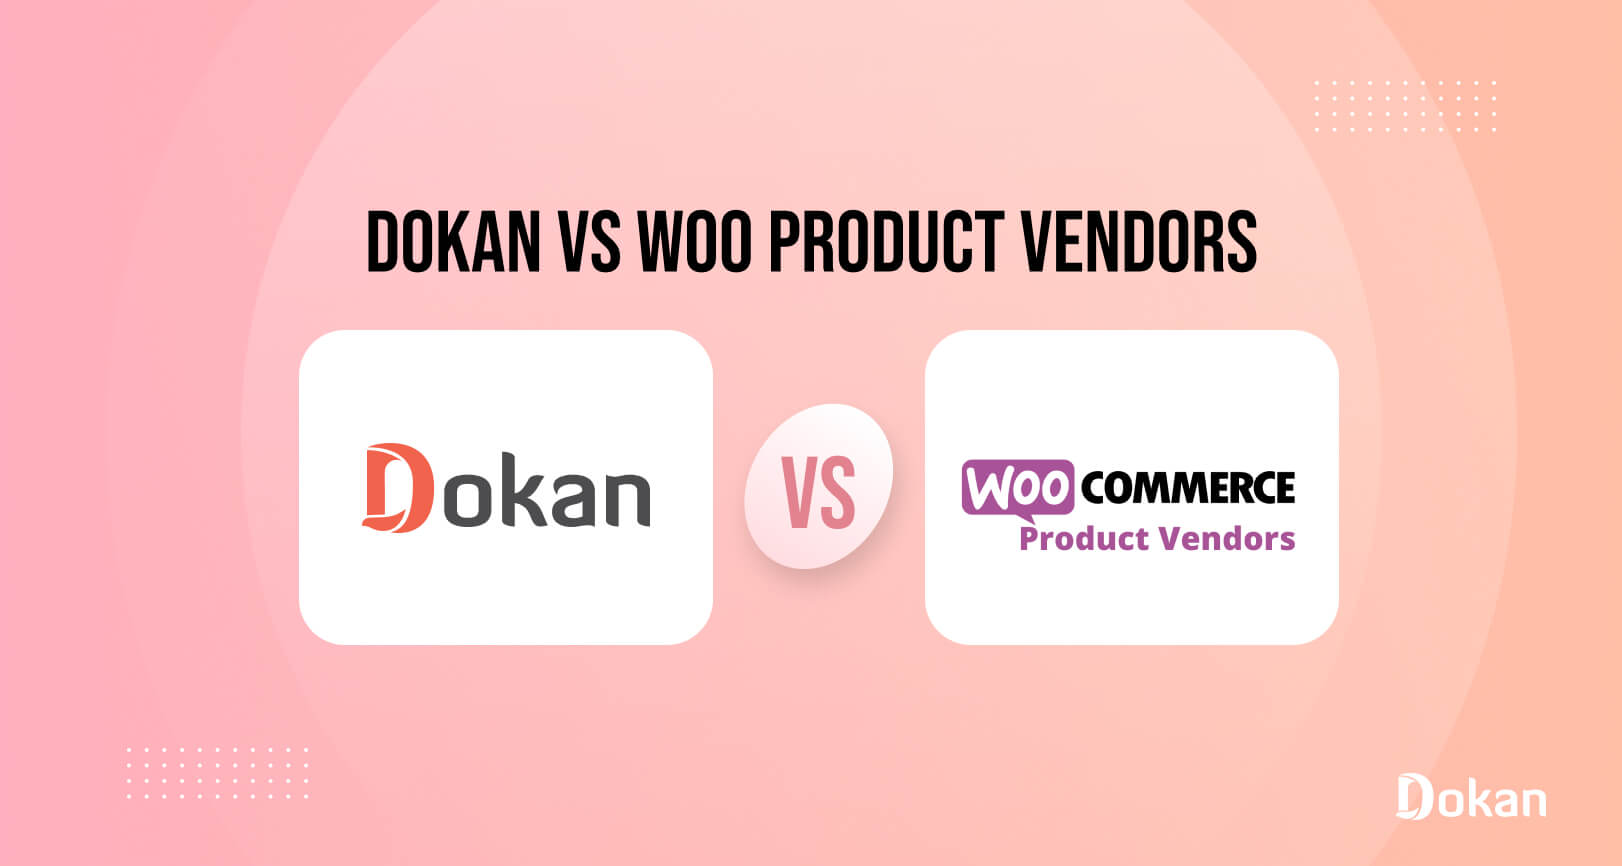 This is feature image of dokan vs woo product vendors